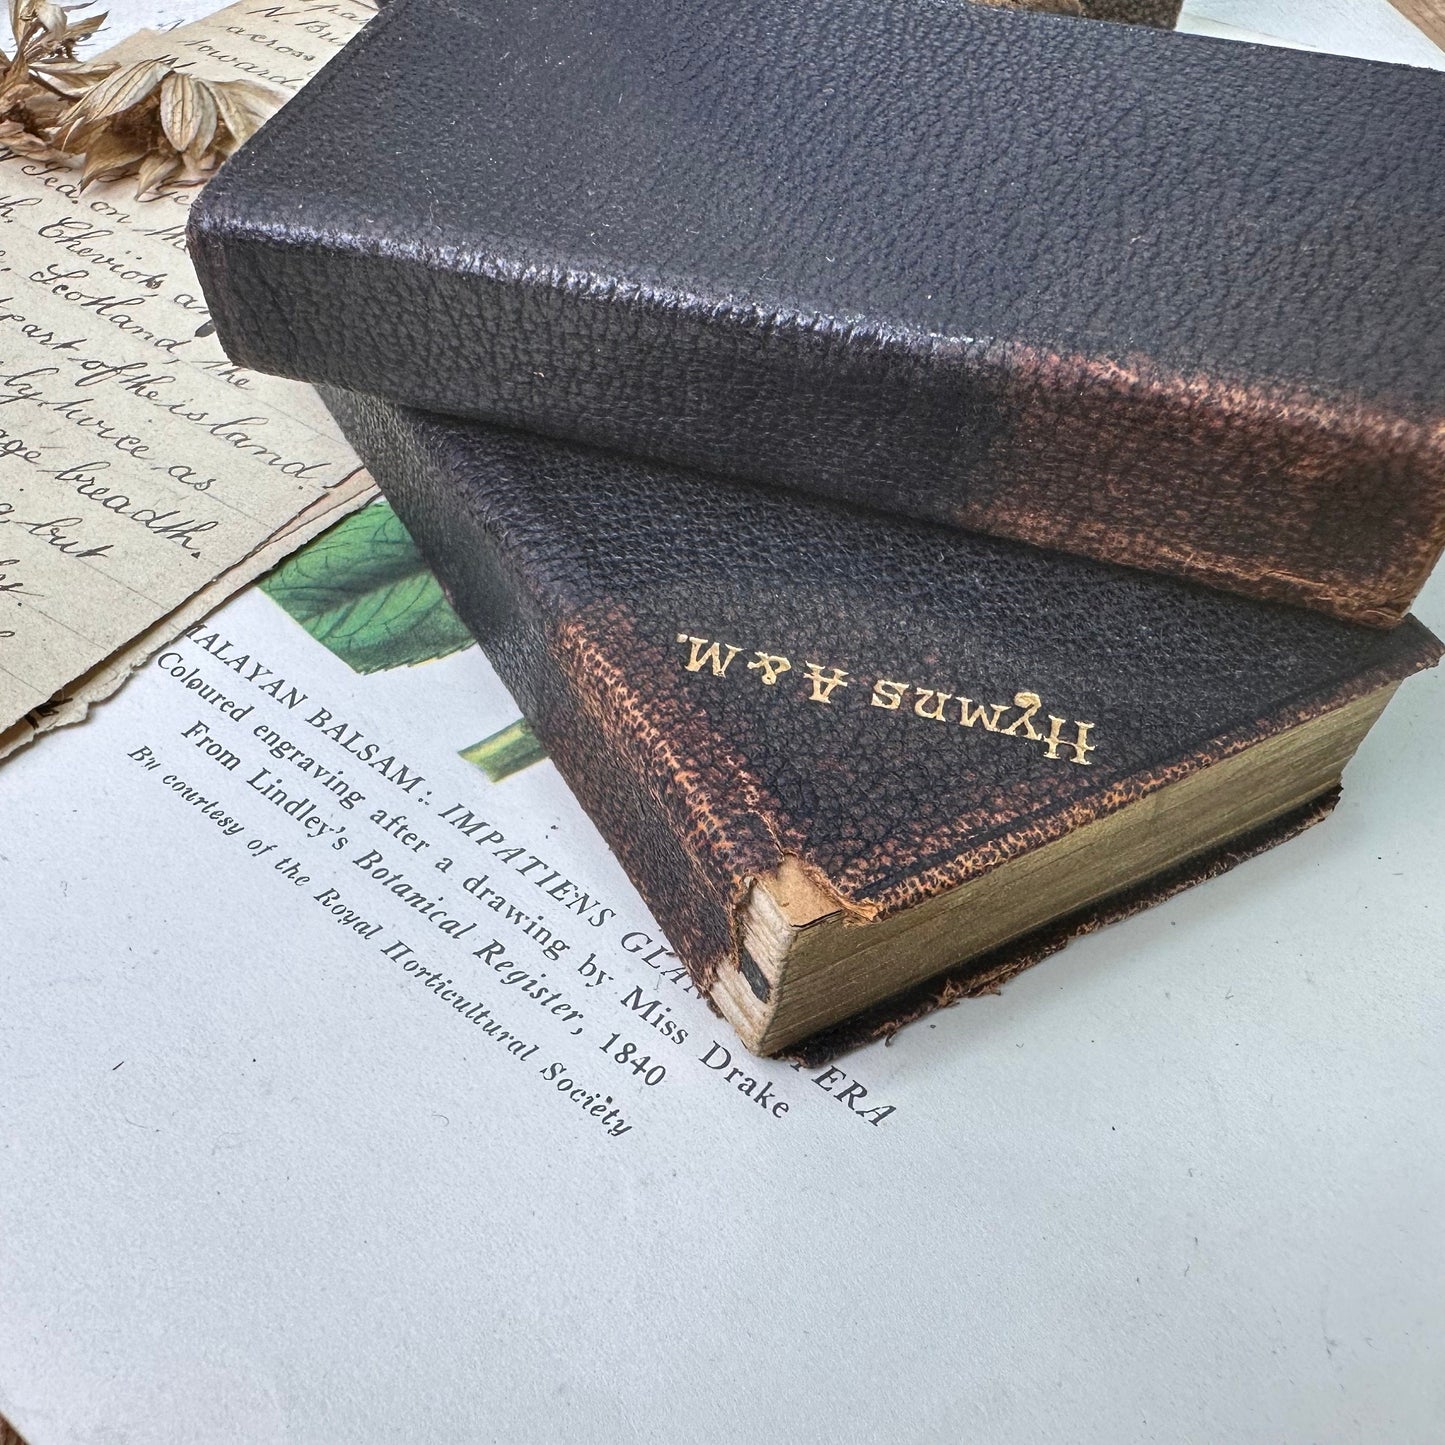 Boxed Leather Bound Hymns and Common Prayer Books